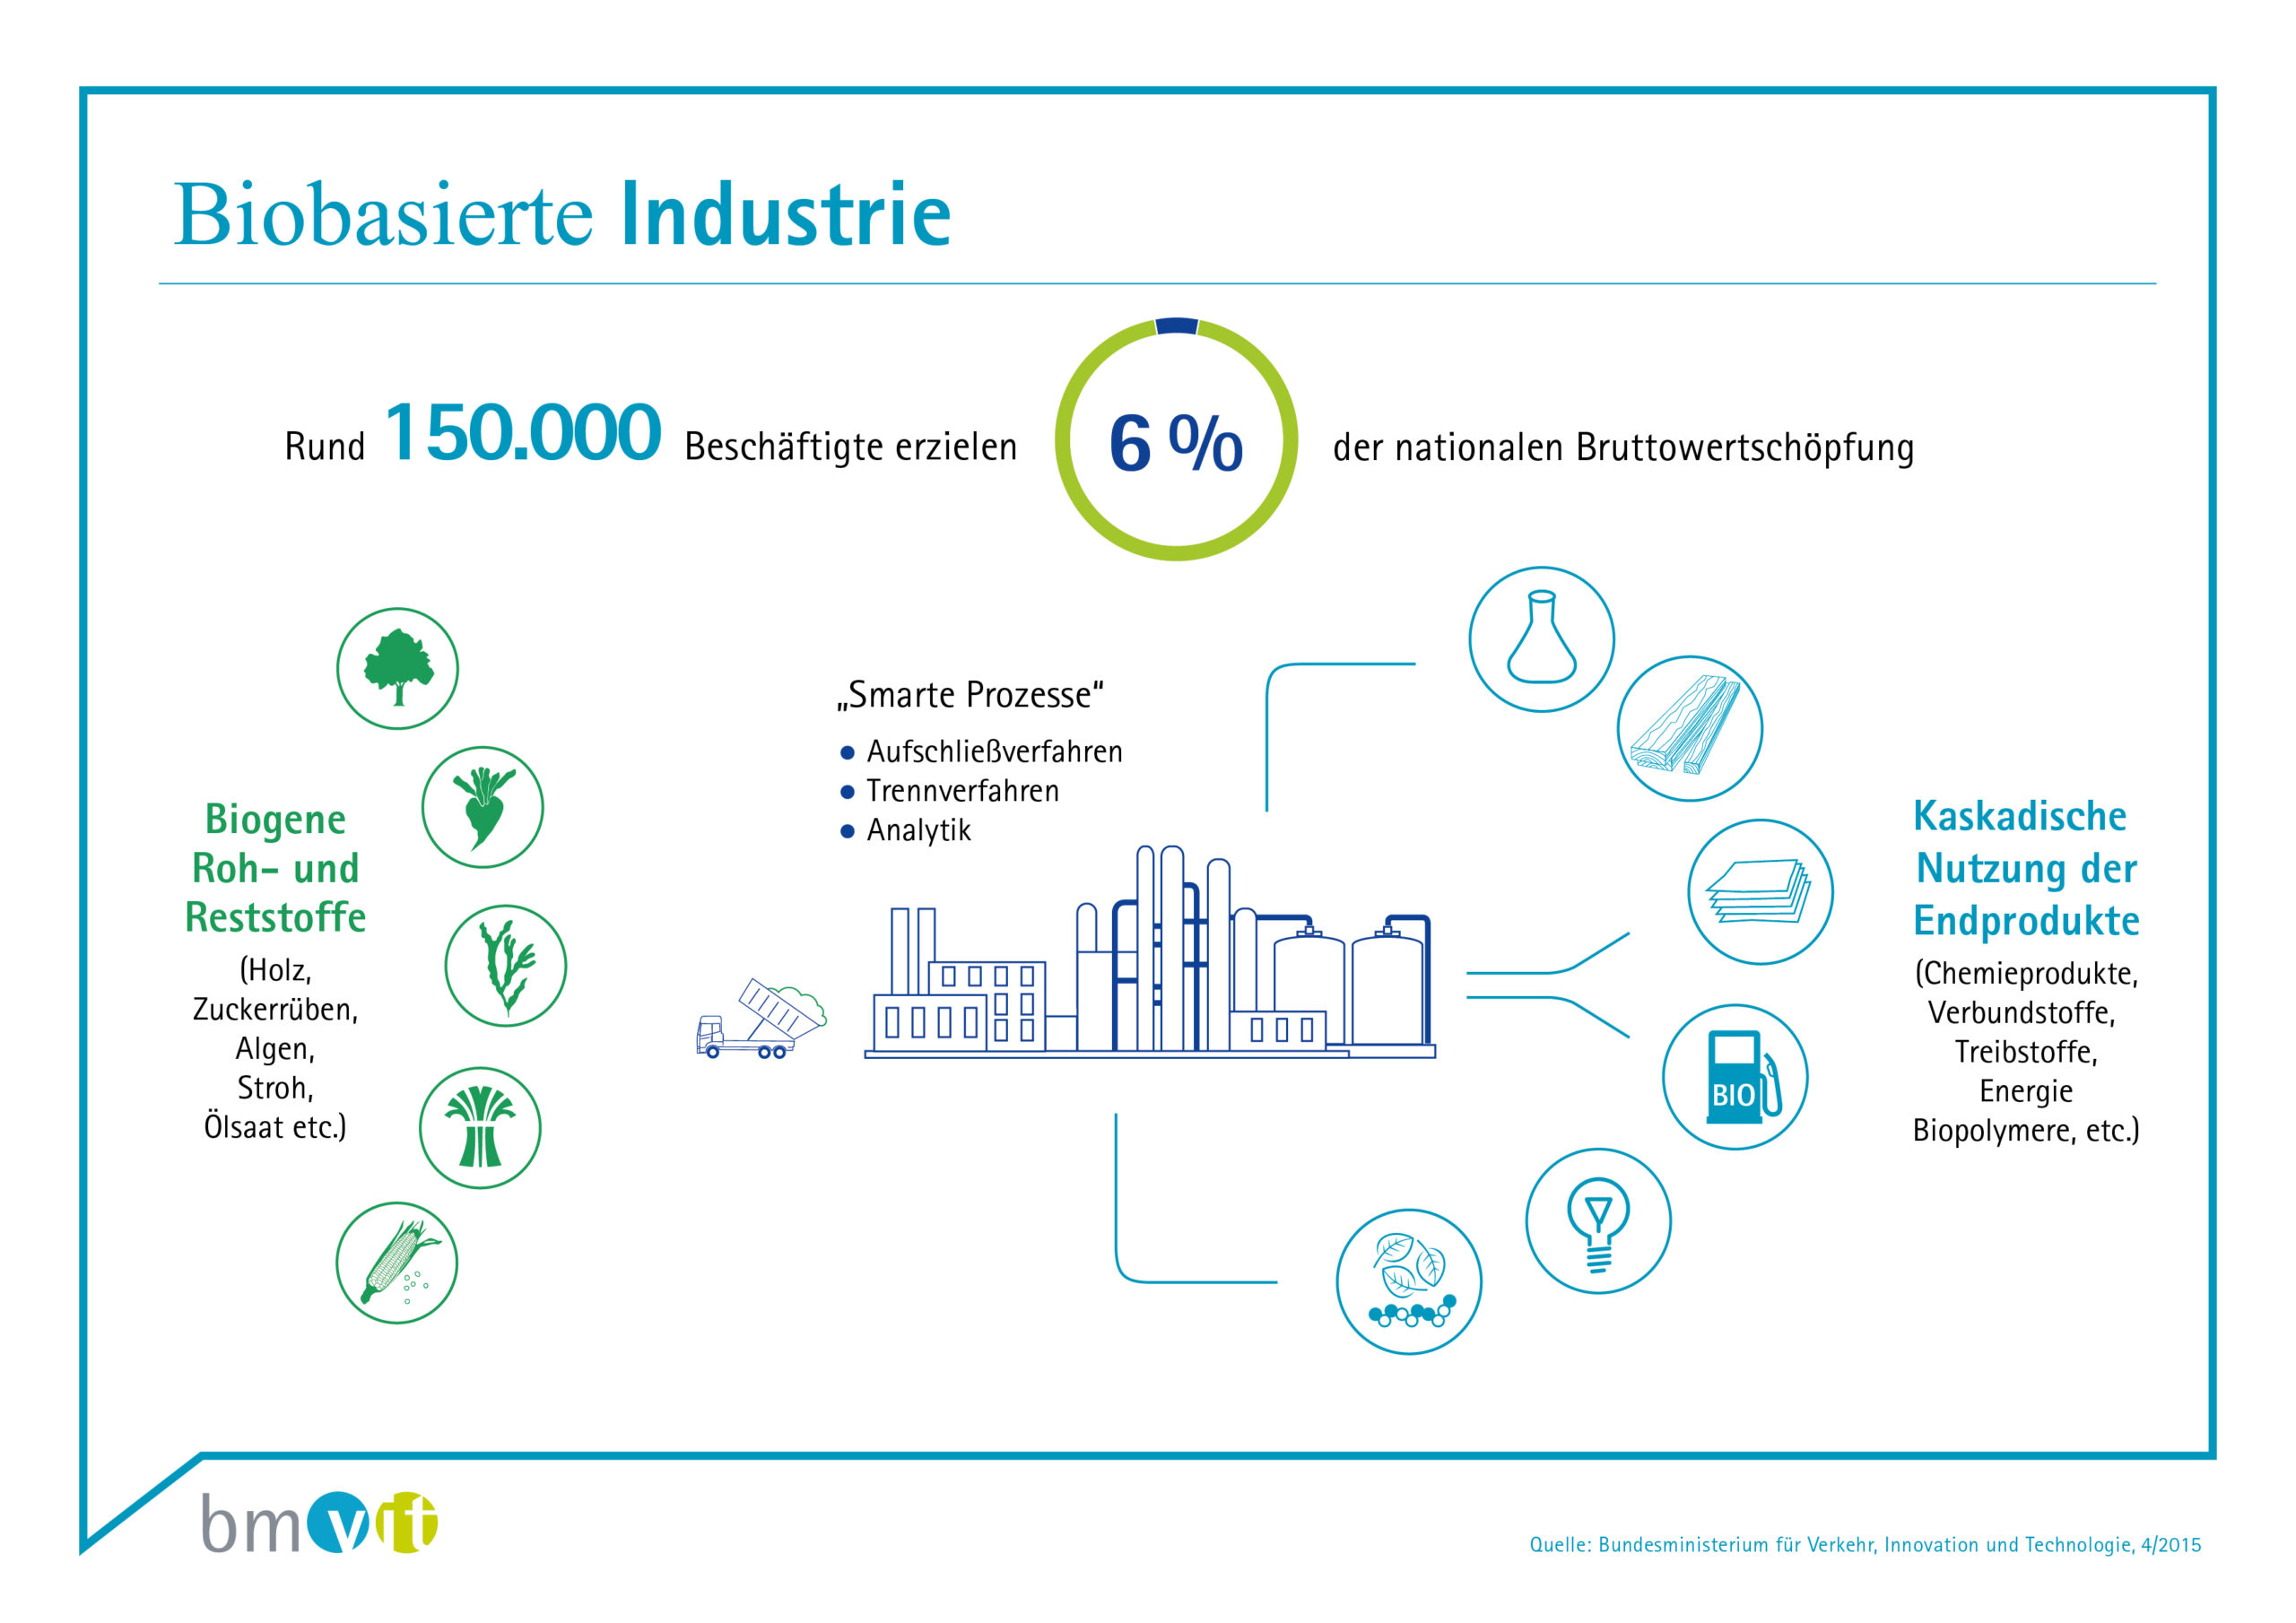 Developing the Austrian biobased industry